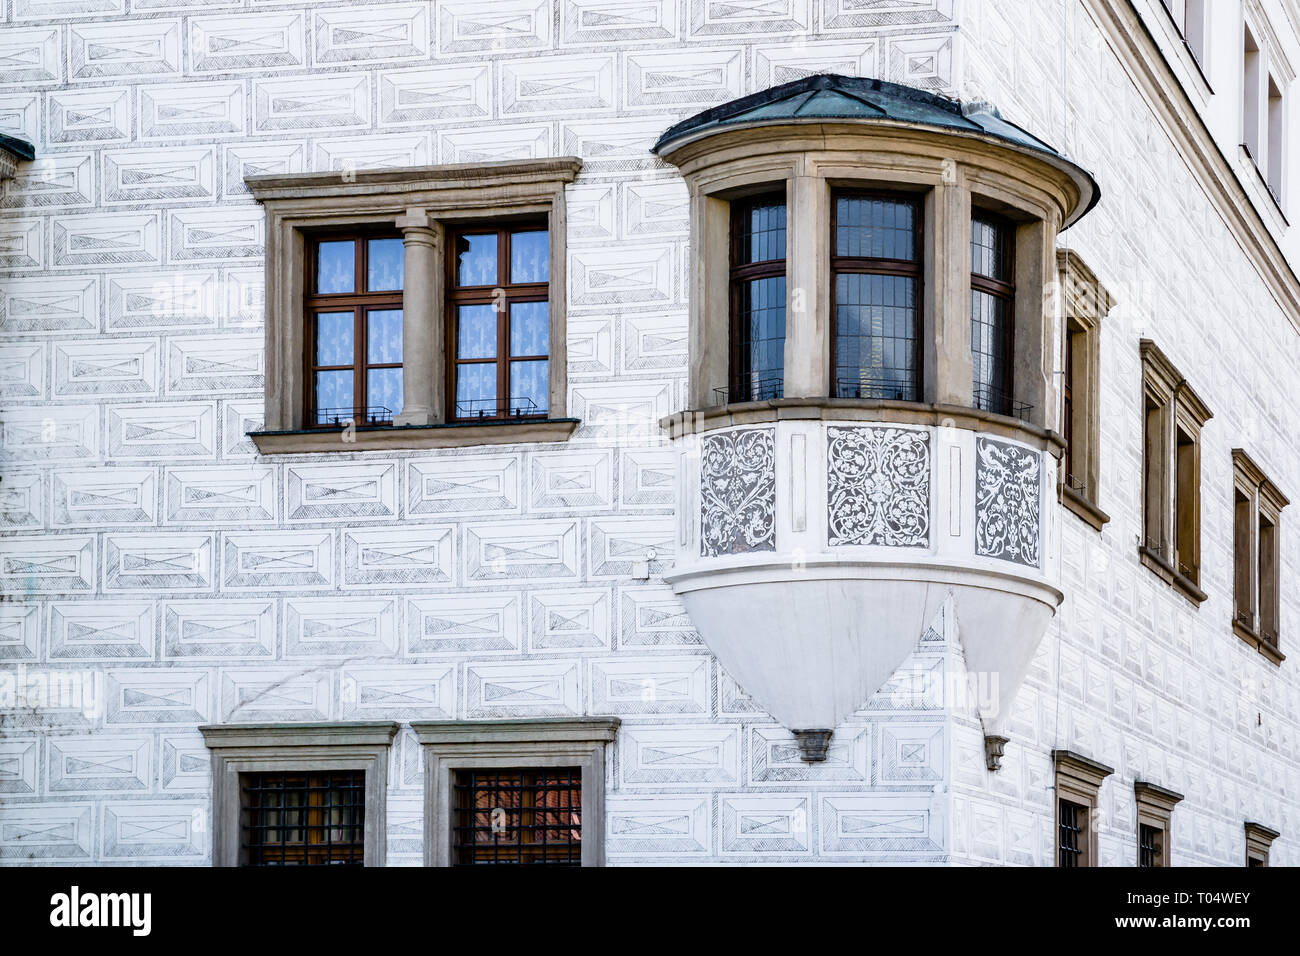 The town hall in Kyjov, South Moravia, Czech Republic. Showing the ornate sgraffito patterned design bricks and corner bay window in Renaissance style Stock Photo